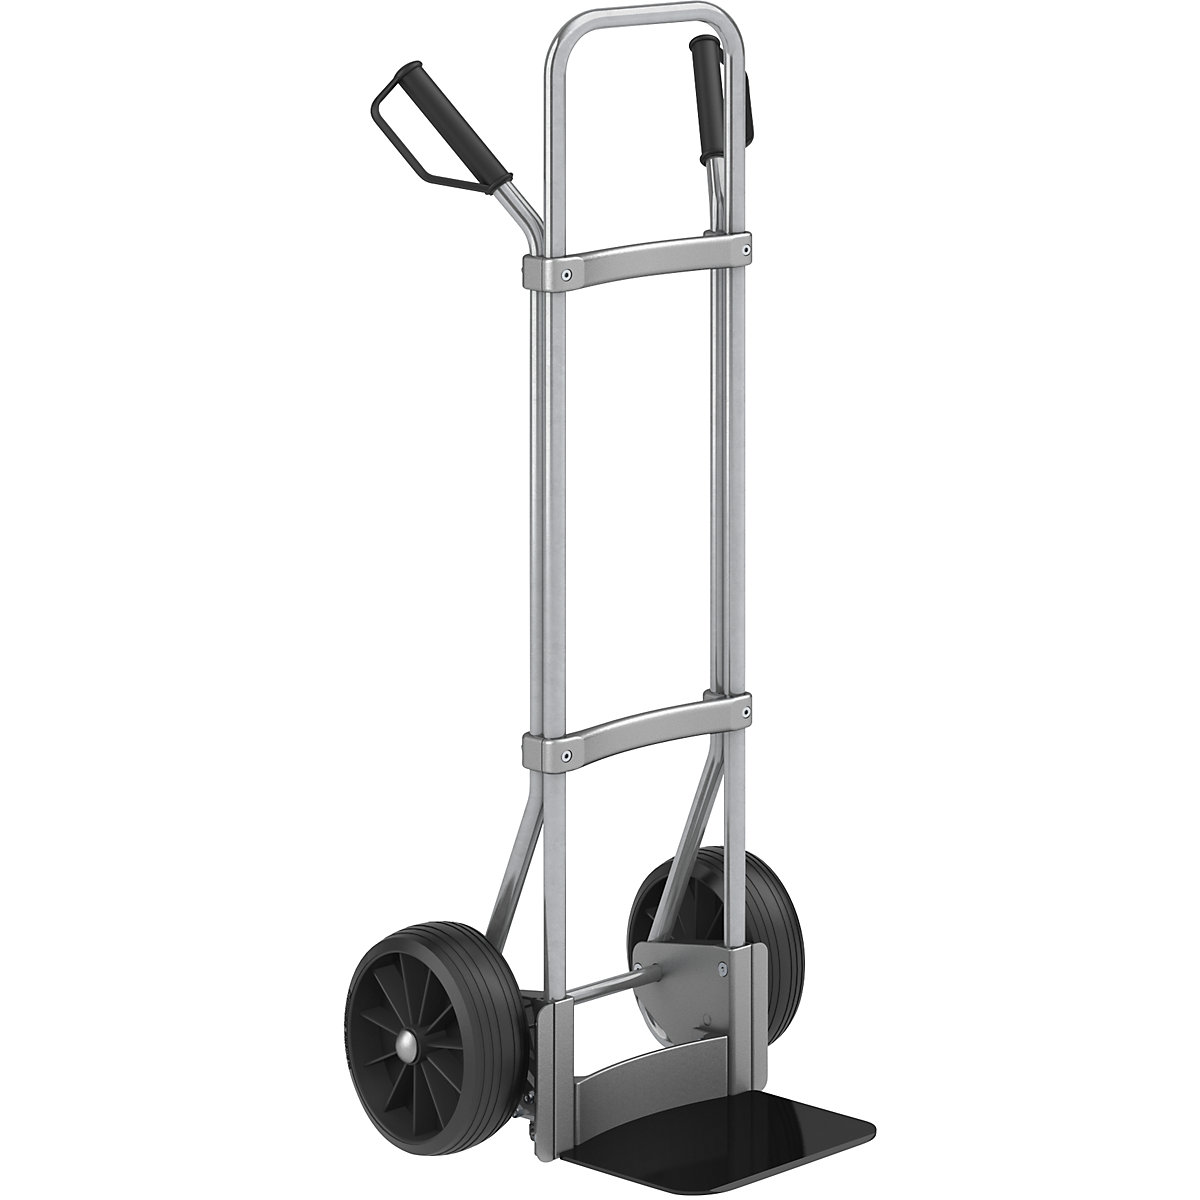 Sack truck, zinc plated – eurokraft pro, footplate WxD 280 x 250 mm, black, solid rubber tyres, 5+ items-1